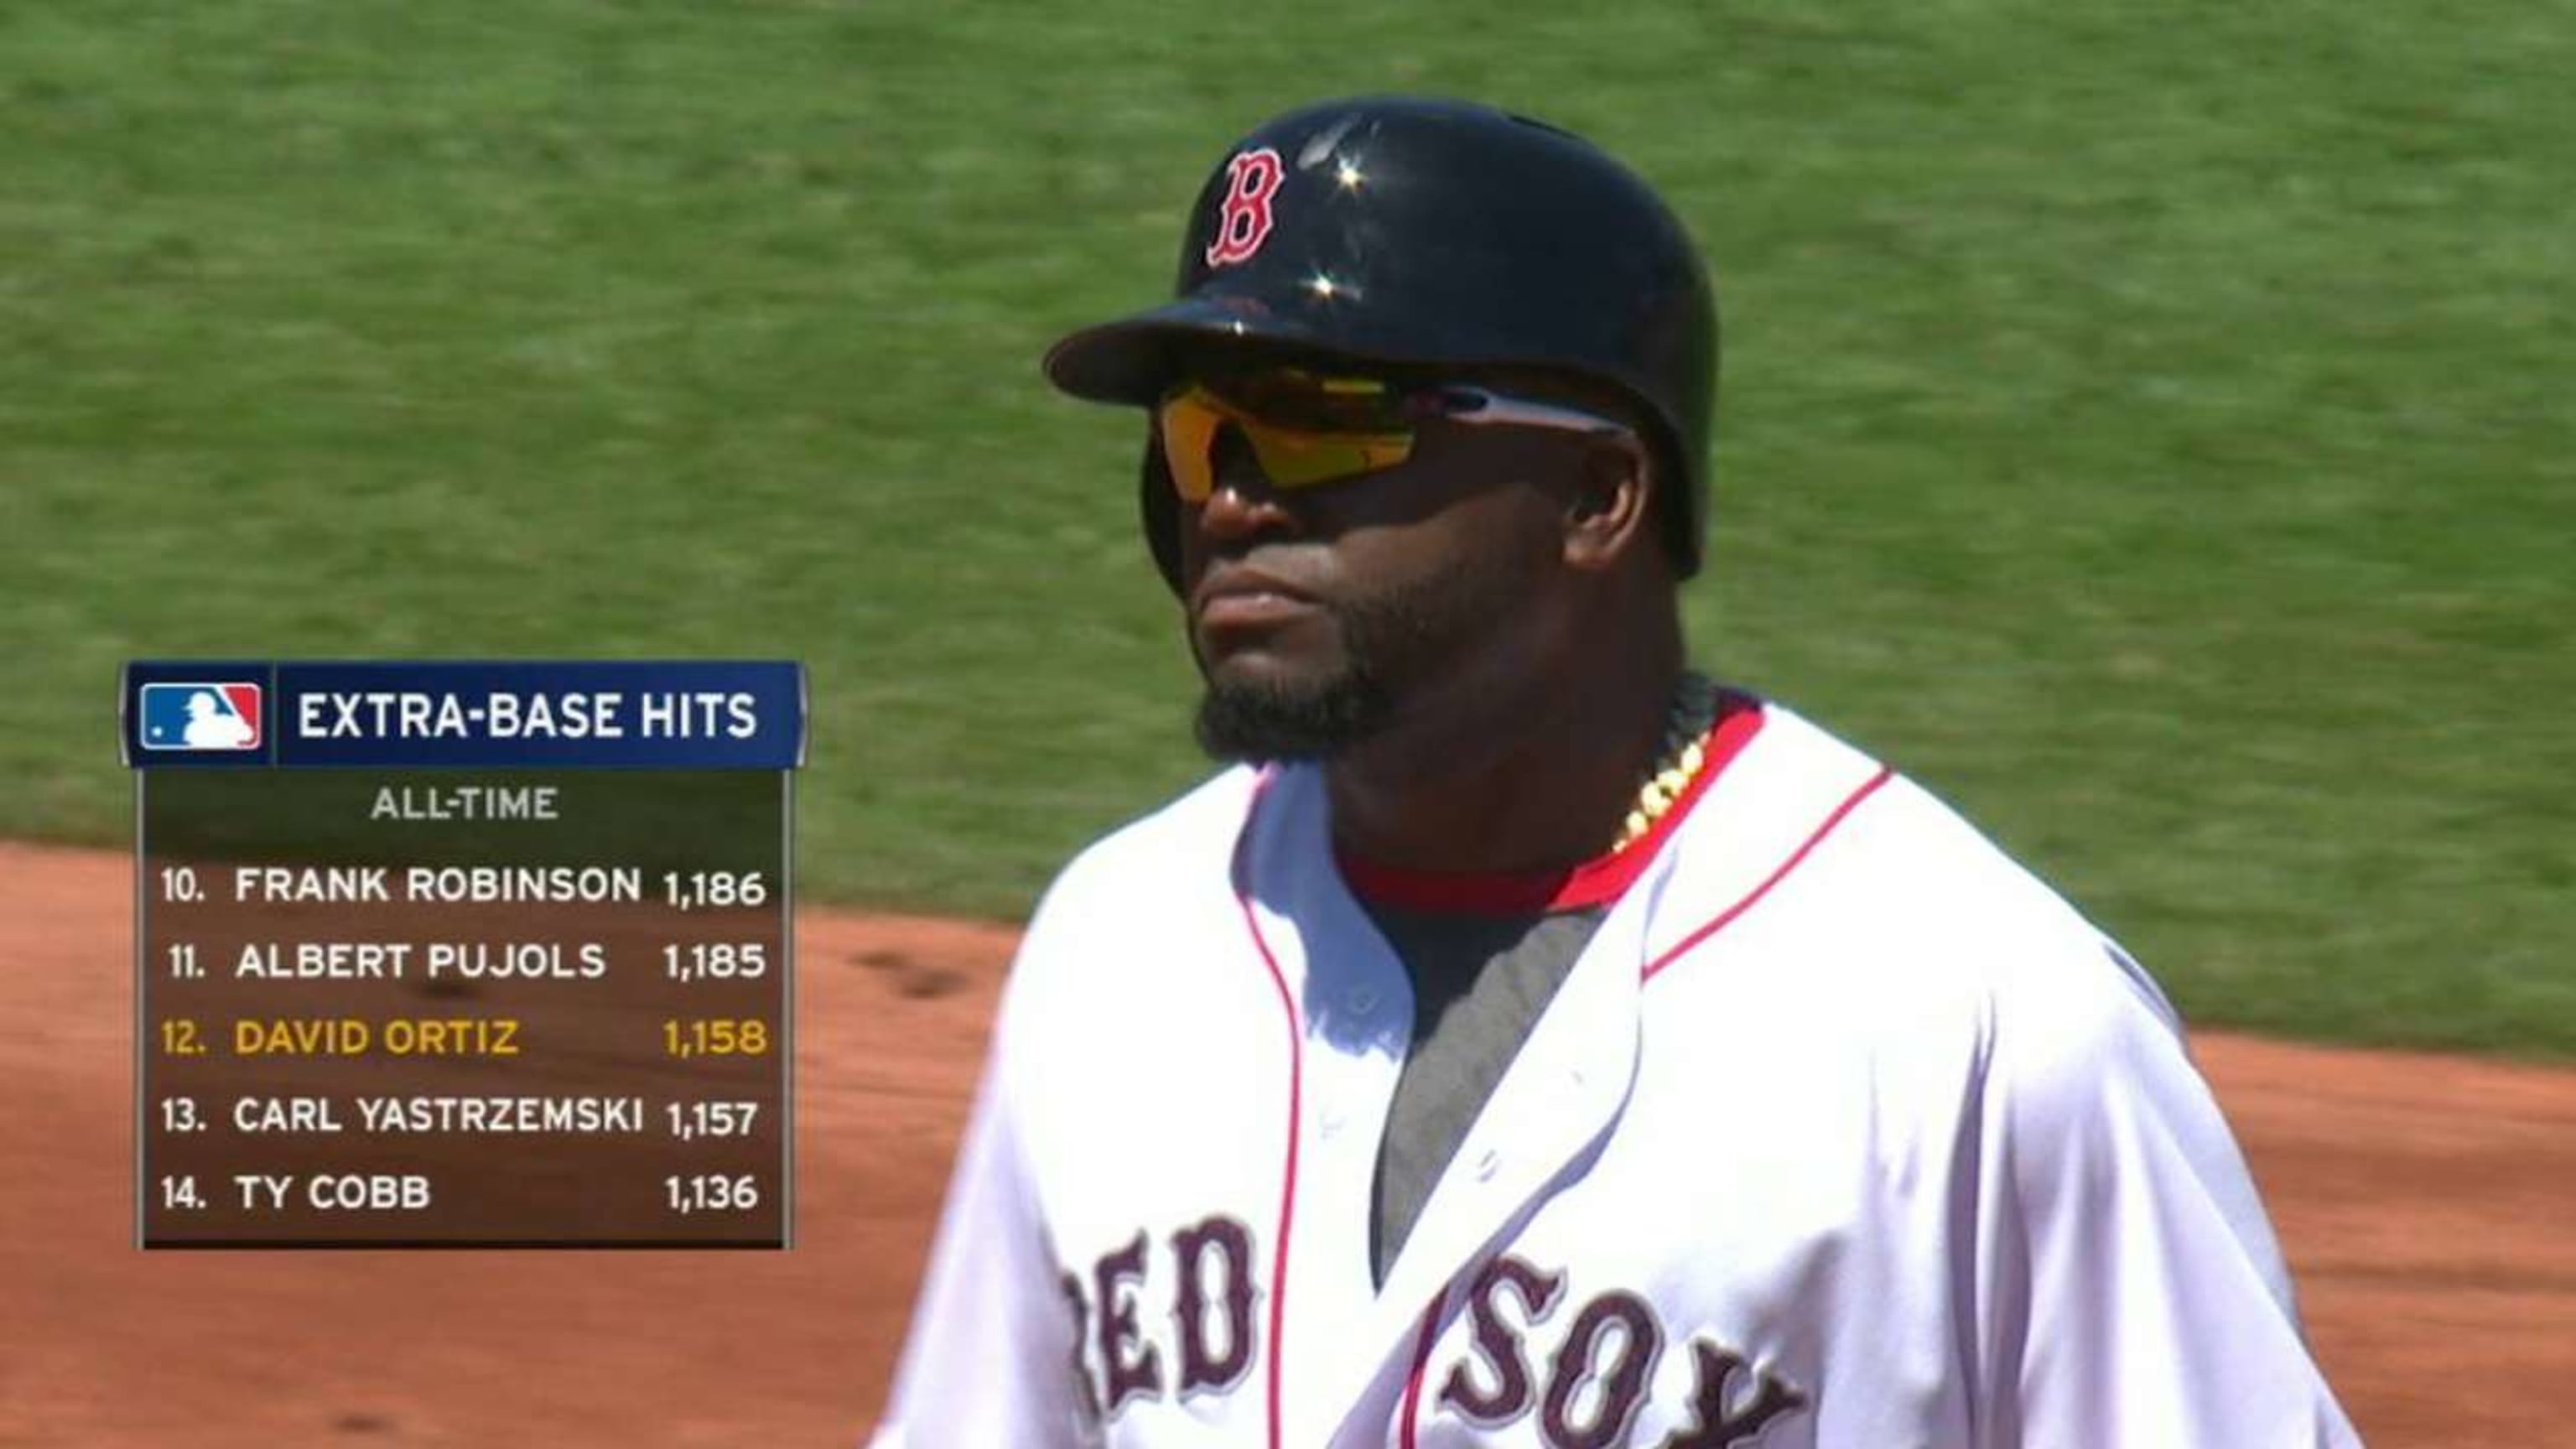 Yaz says Ortiz is the better hitter